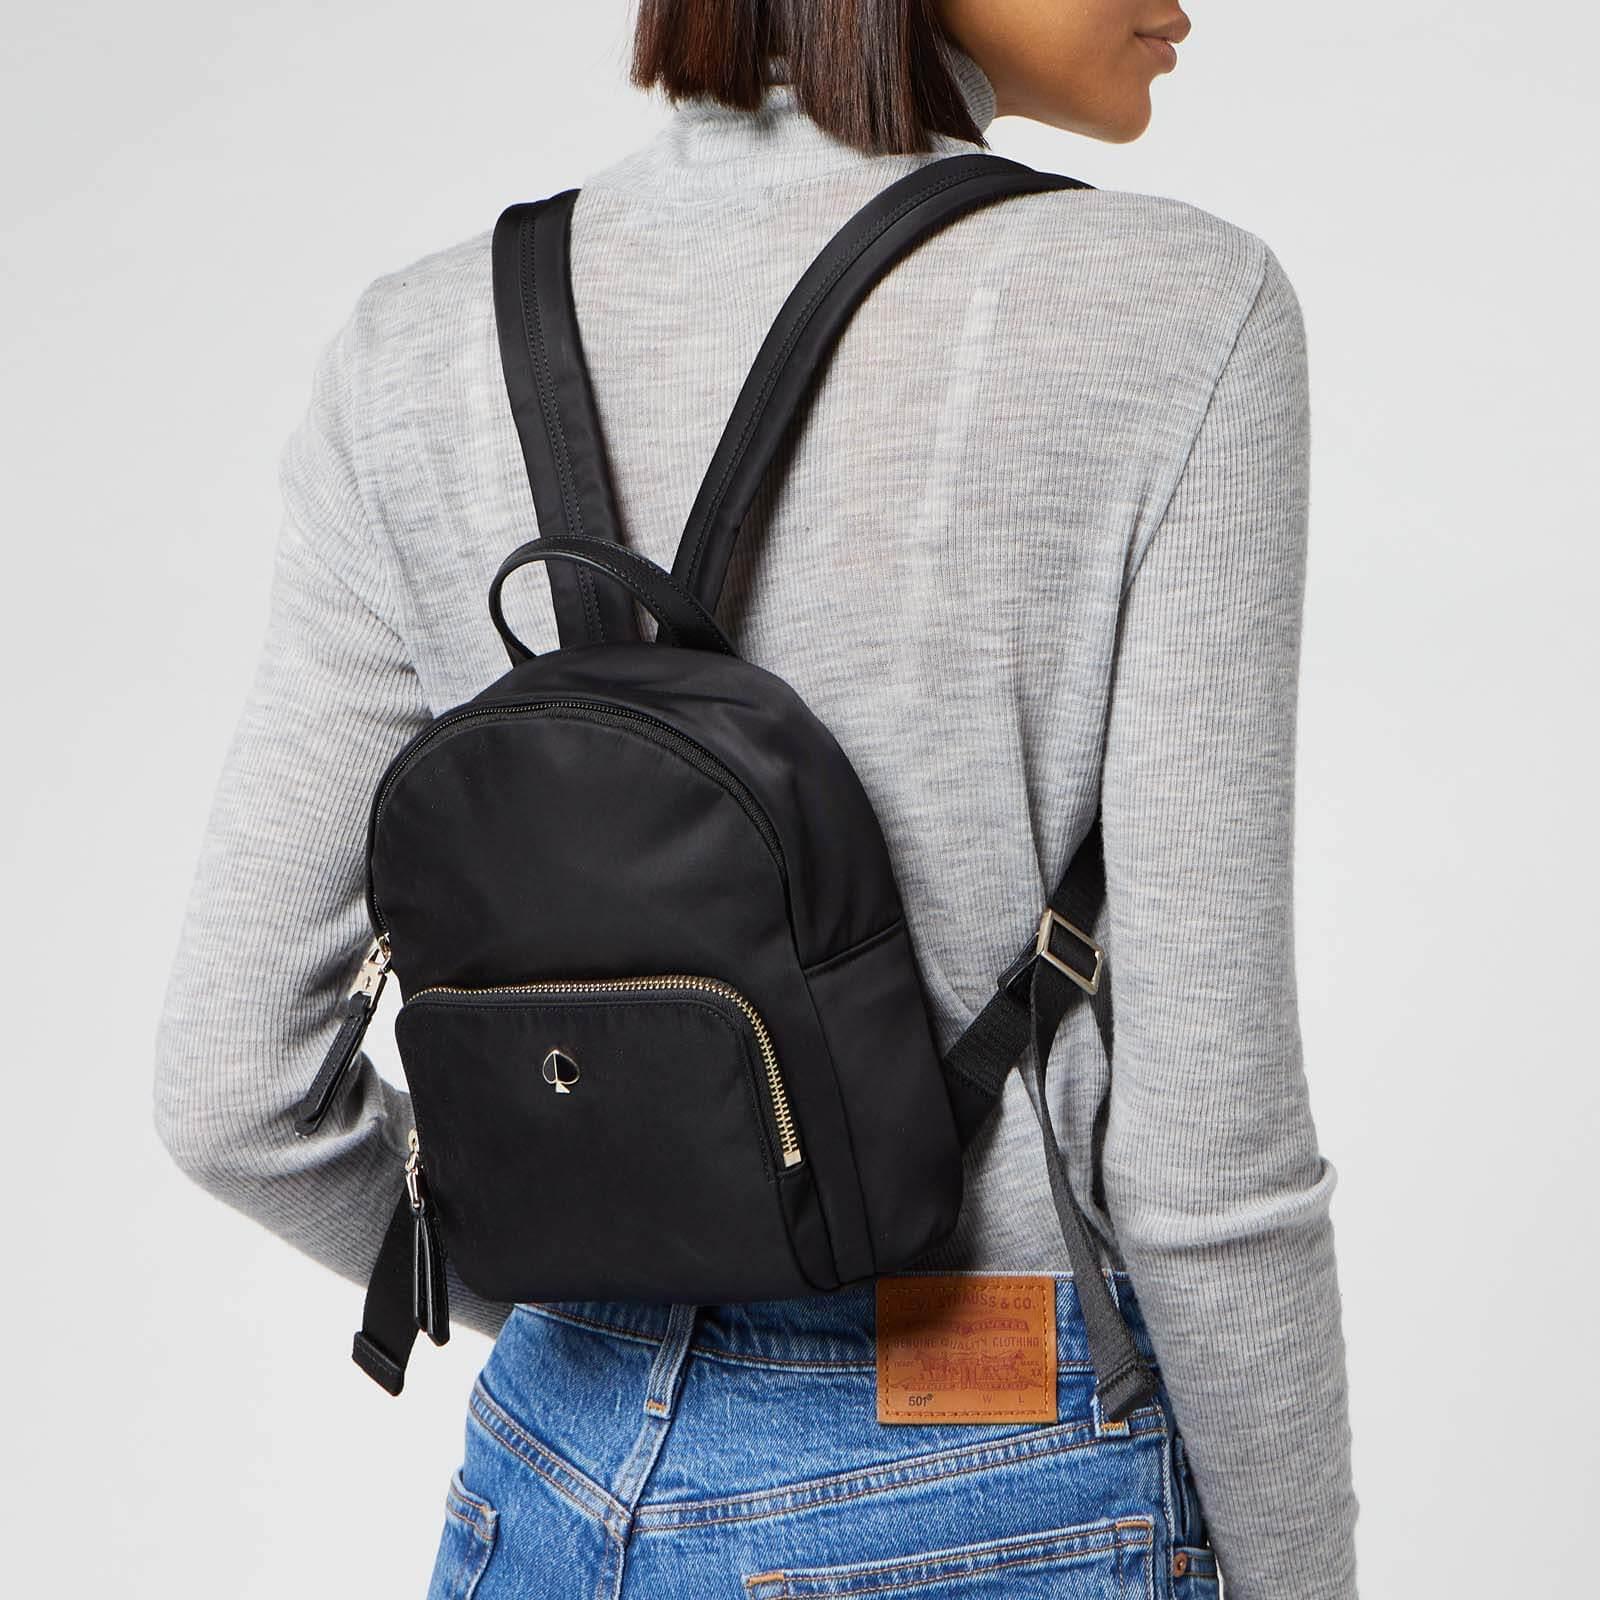 Kate Spade Taylor Small Backpack in Black | Lyst